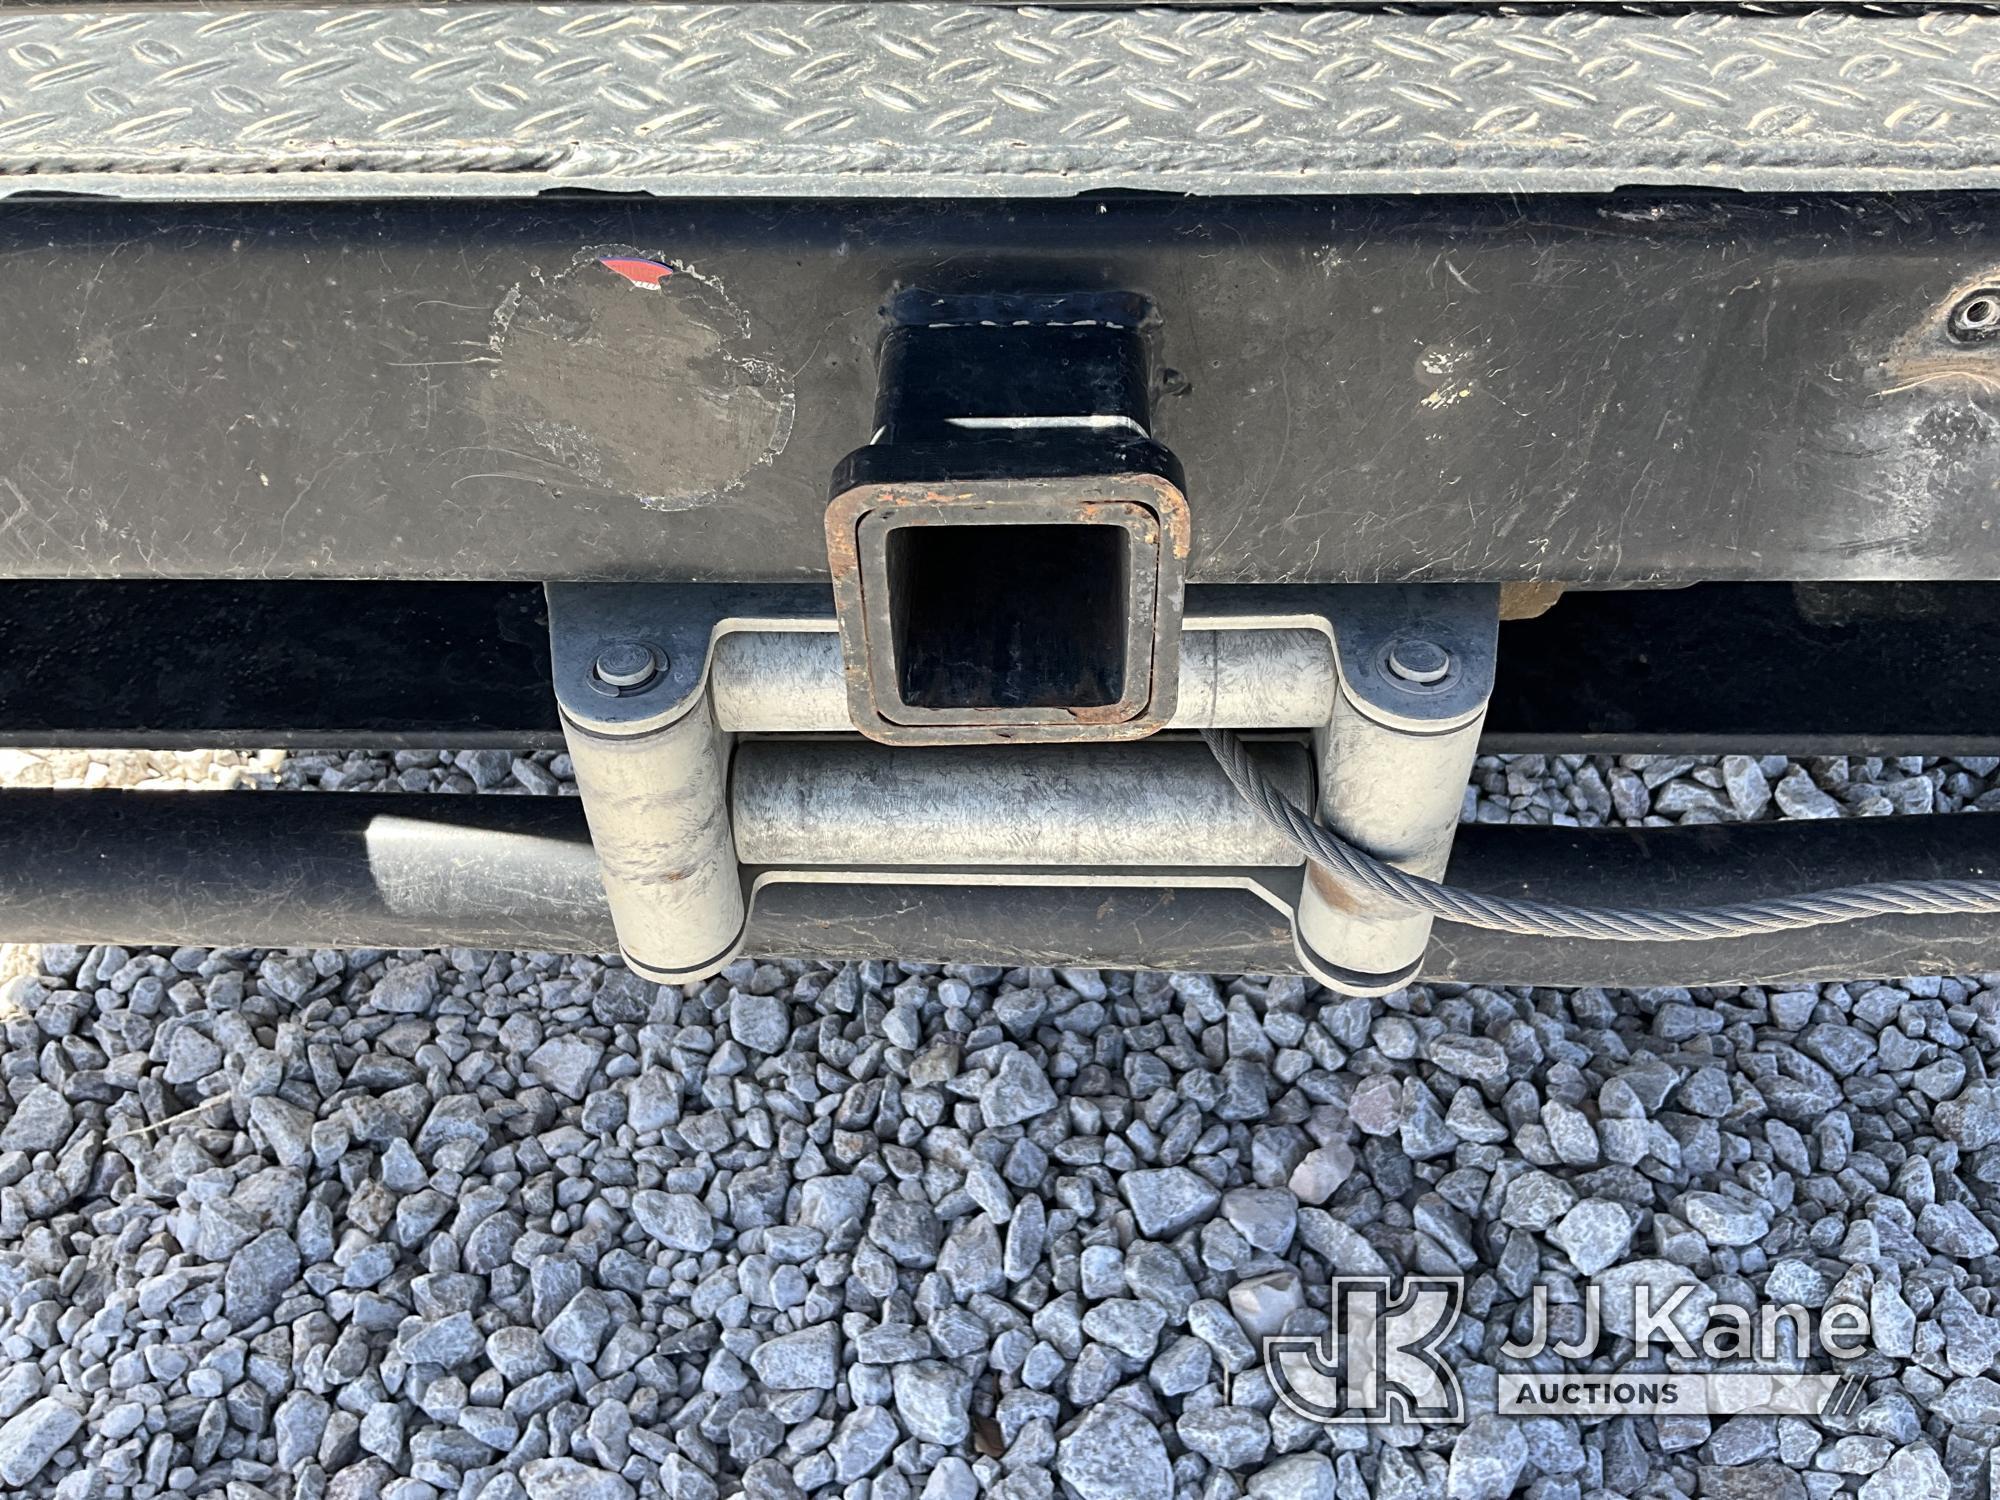 (El Paso, TX) 2014 Ford F550 4x4 Crew-Cab Flatbed Truck Runs and Moves, Oil Change Notification On,